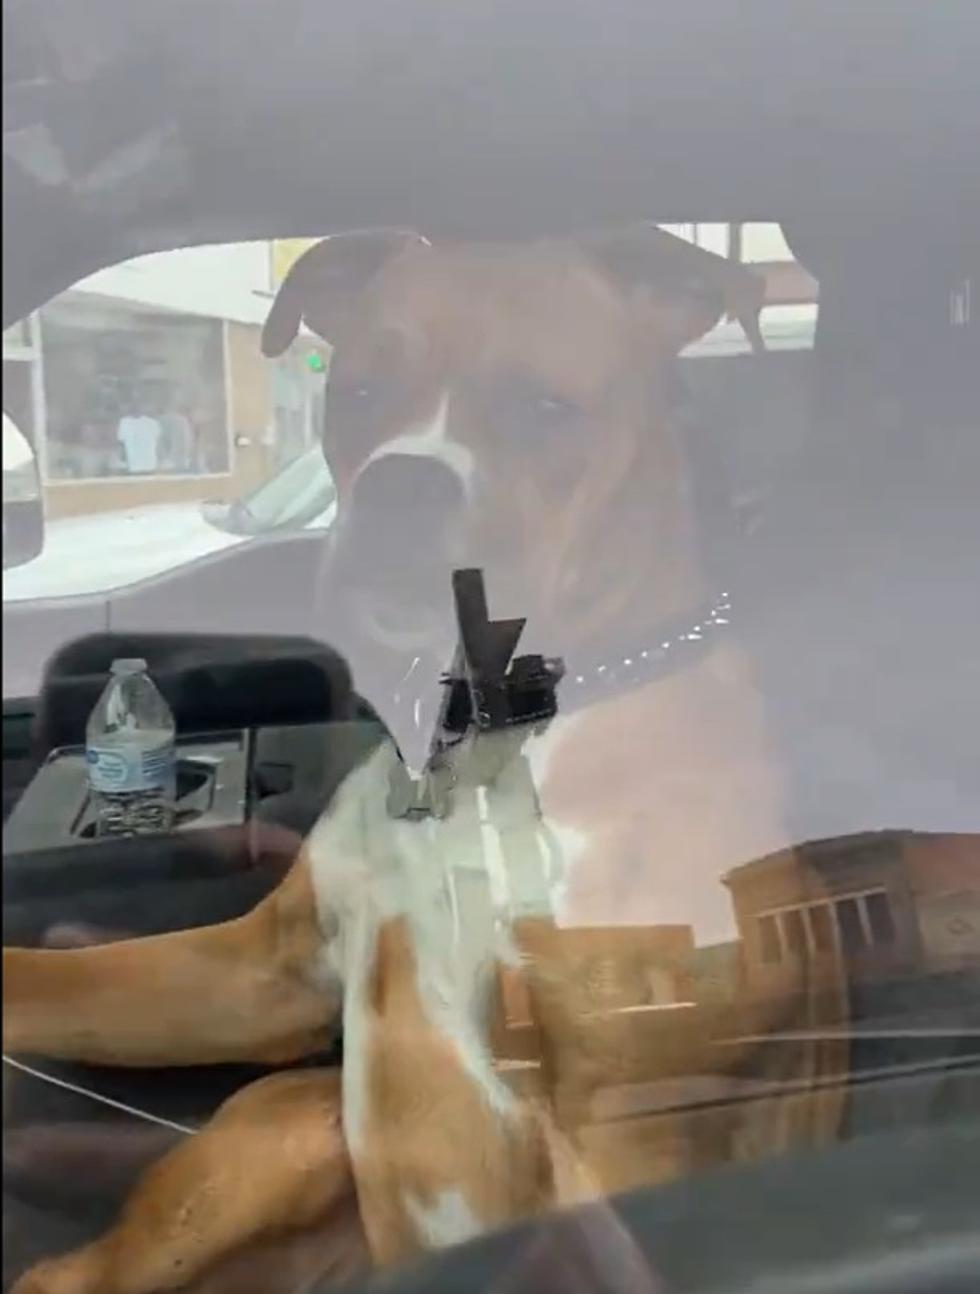 You’ll Laugh At This Terrific Wyoming Dog Video